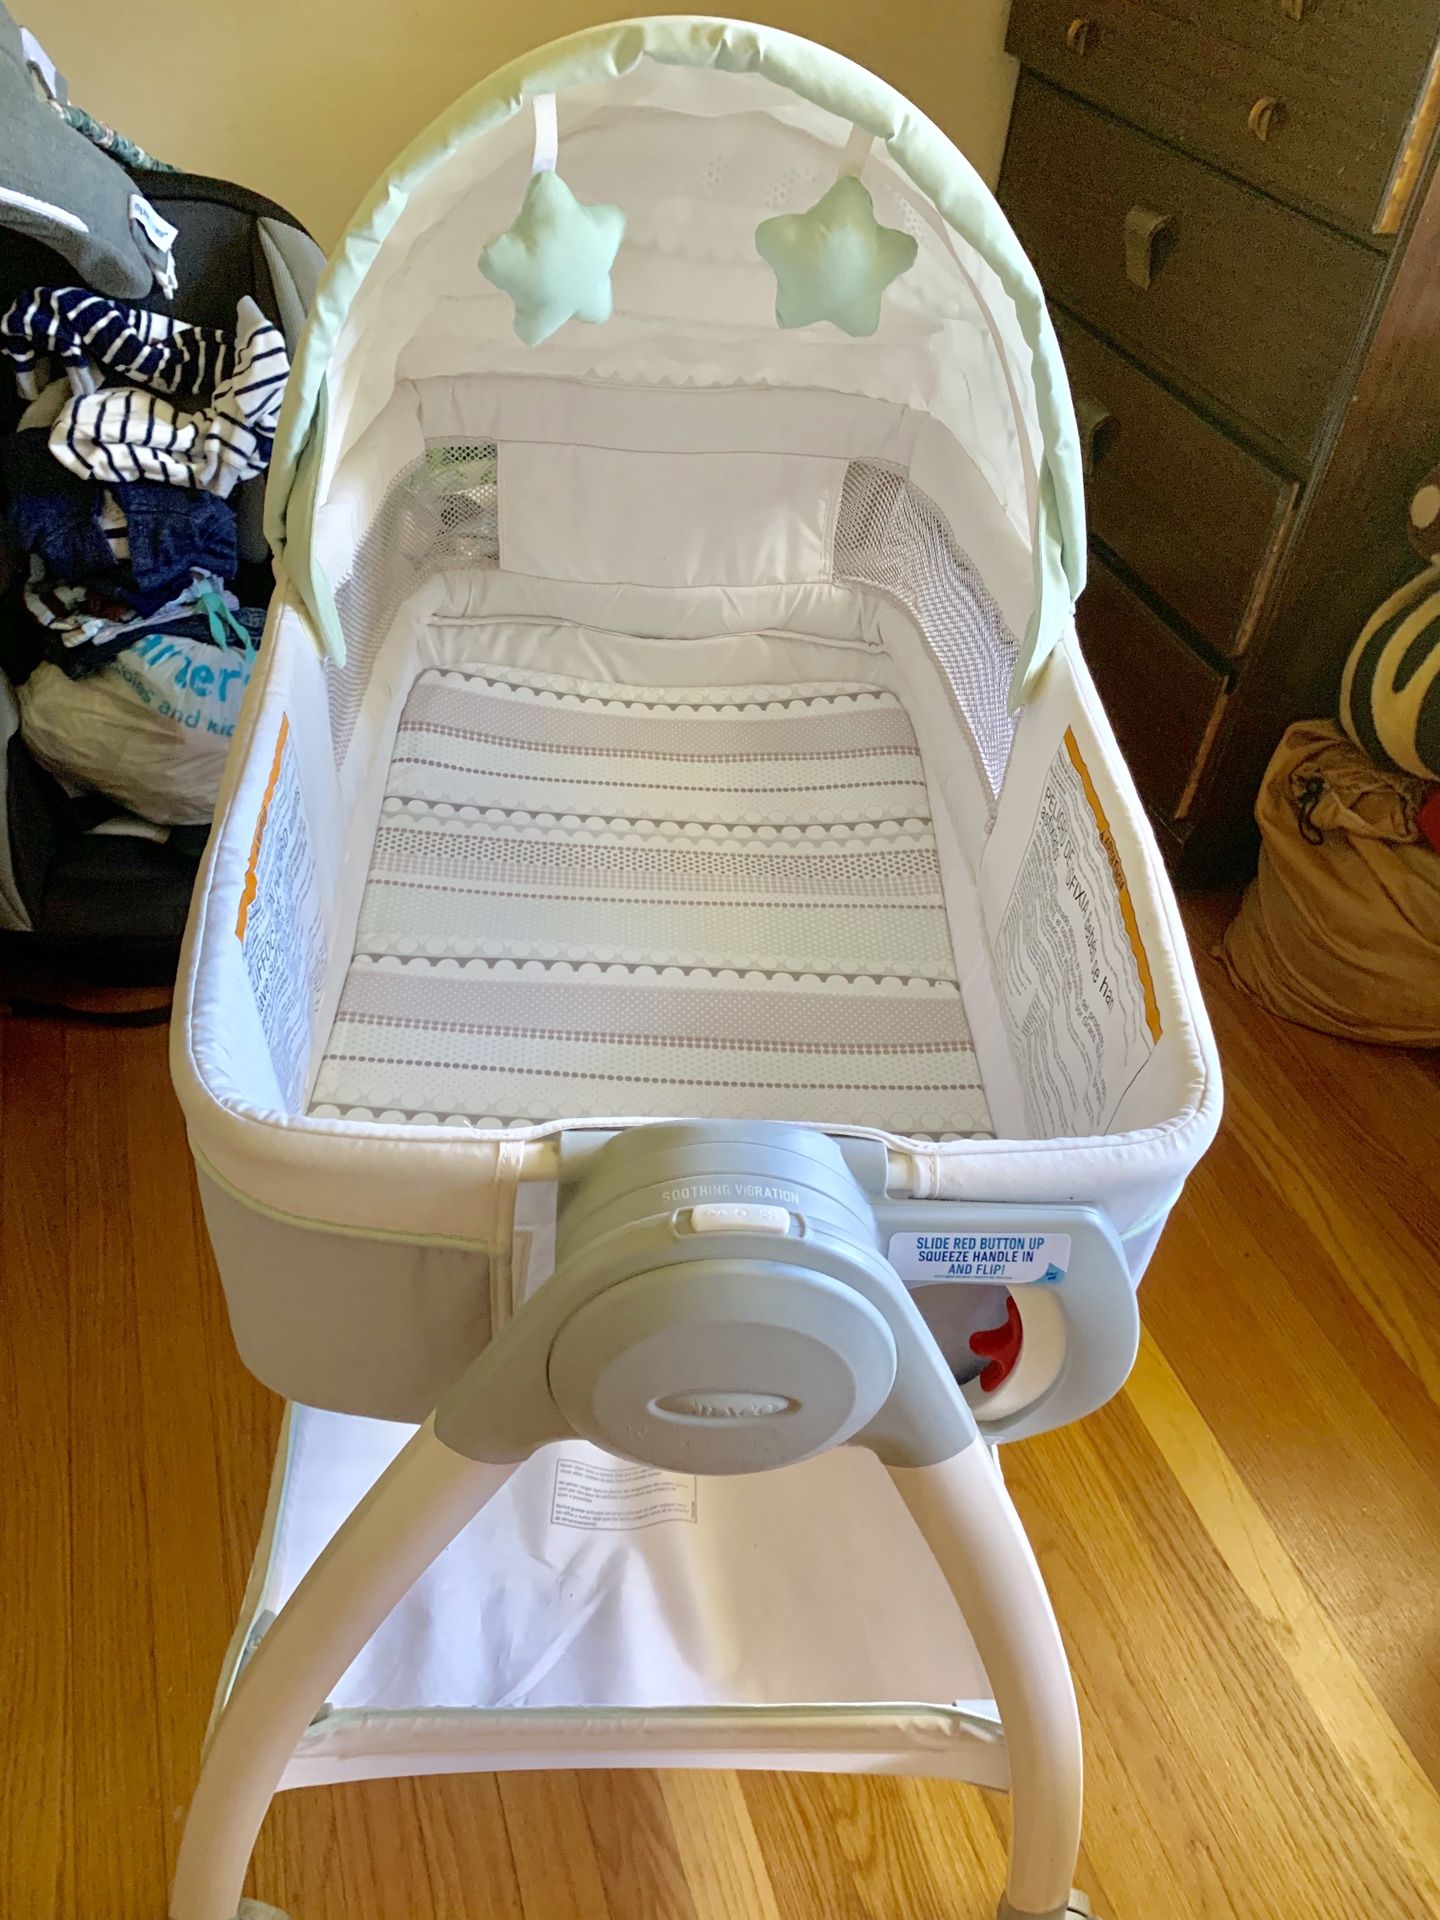 Basinet/changing table